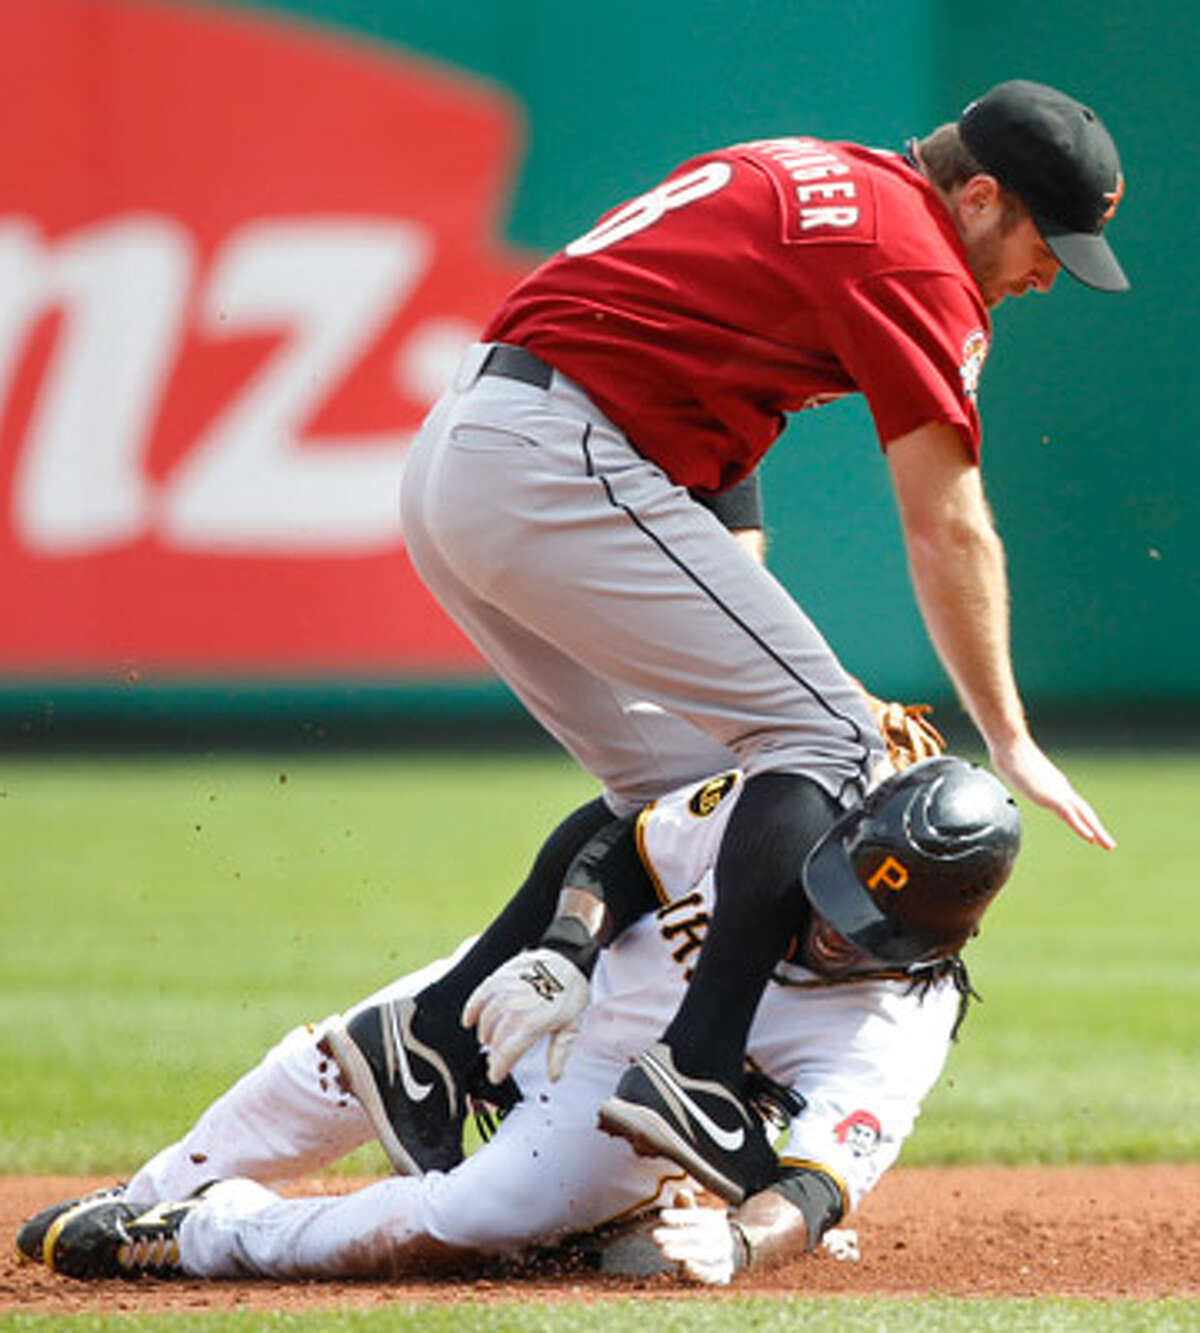 Pittsburgh's Andrew McCutchen slides into Astros second baseman Jeff Keppinger for a groundball force-out.